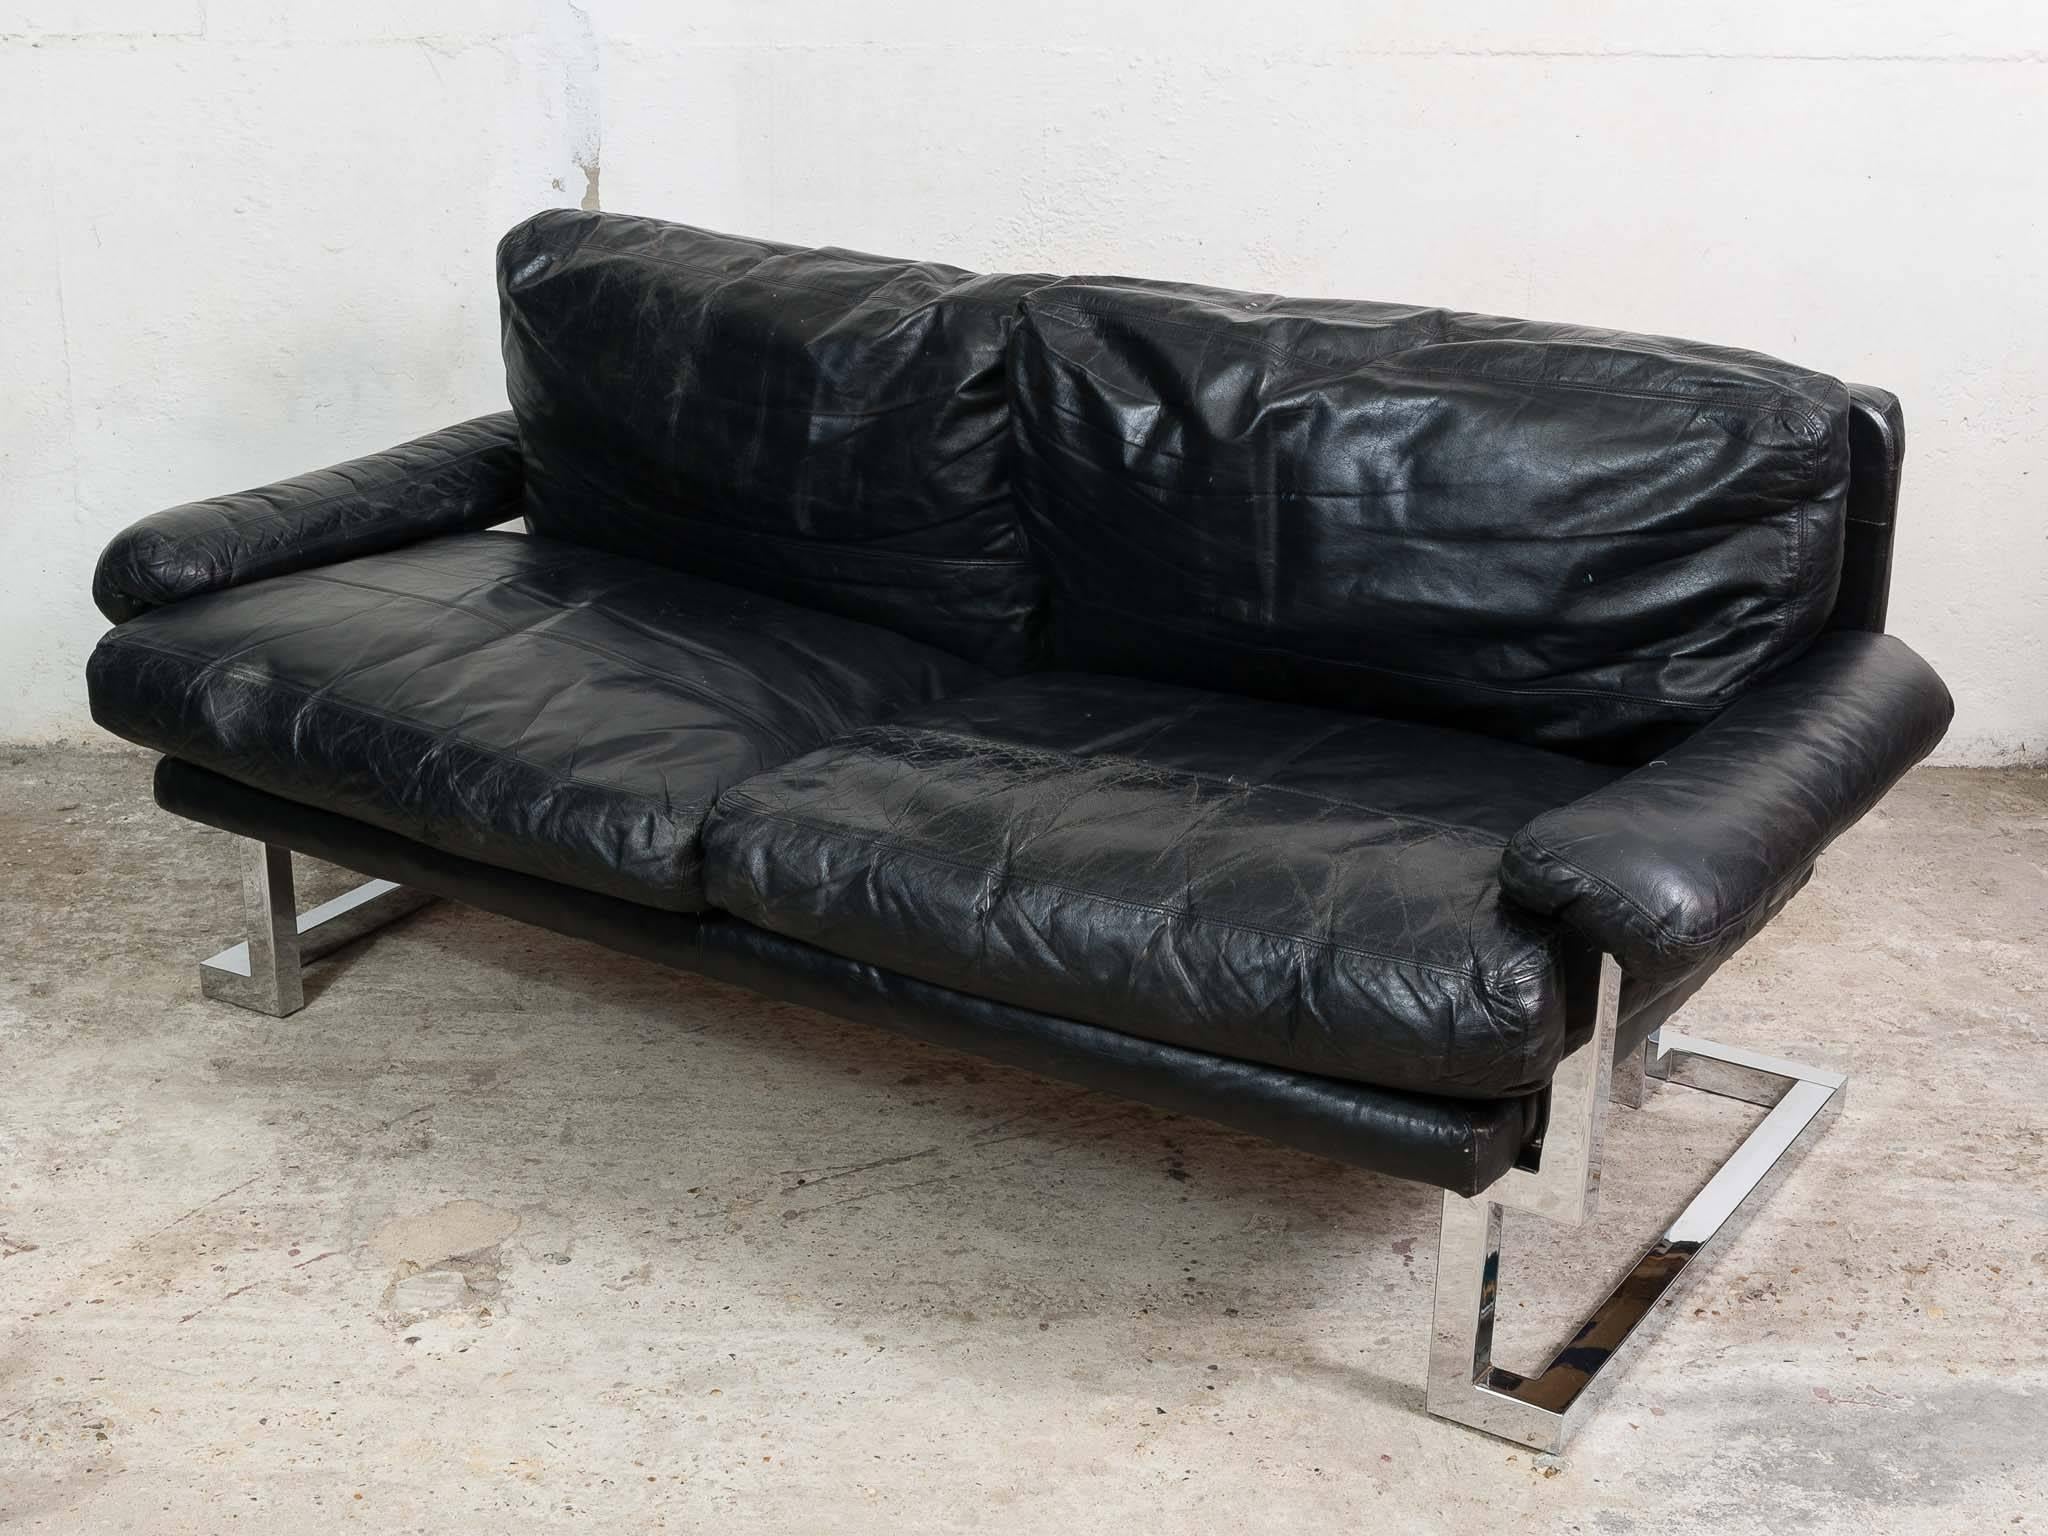 An iconic sofa designed in the 1970s by Pieff of Worcester. Pieff designed and manufactured furniture during 1970s. The chrome frame is in excellent condition. The original black leather is in good vintage condition with some age-related scuffs and